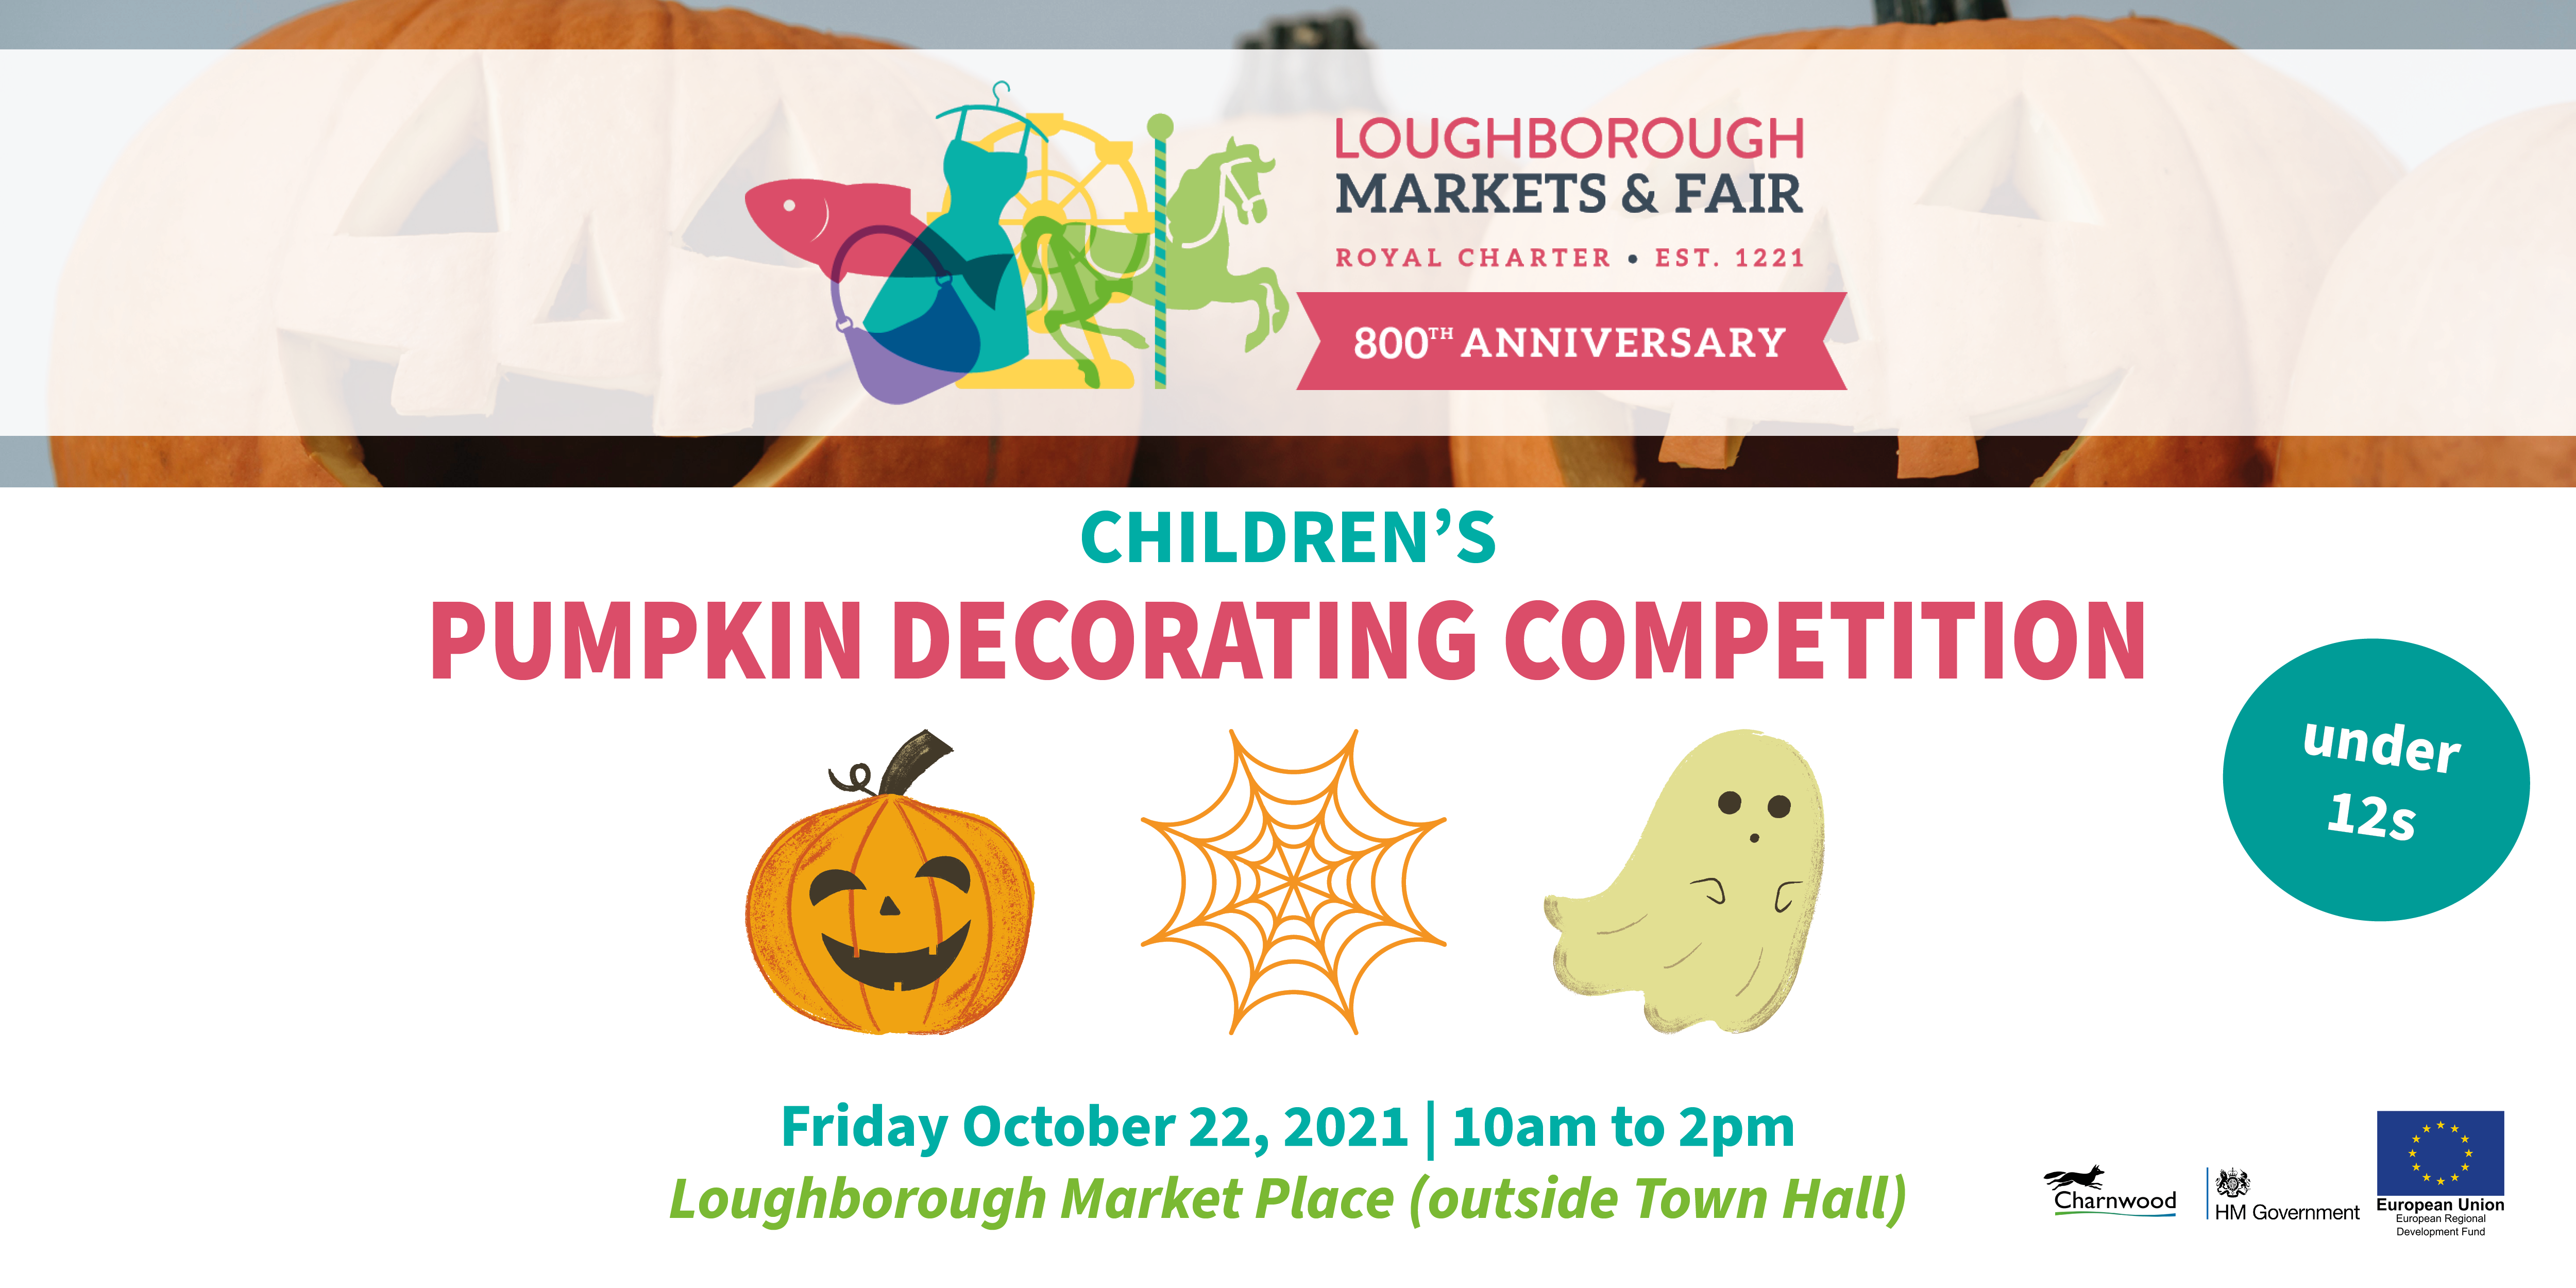 The Pumpkin decorating competition takes place at Loughborough Market on Friday October 22 from 10am until 2pm.